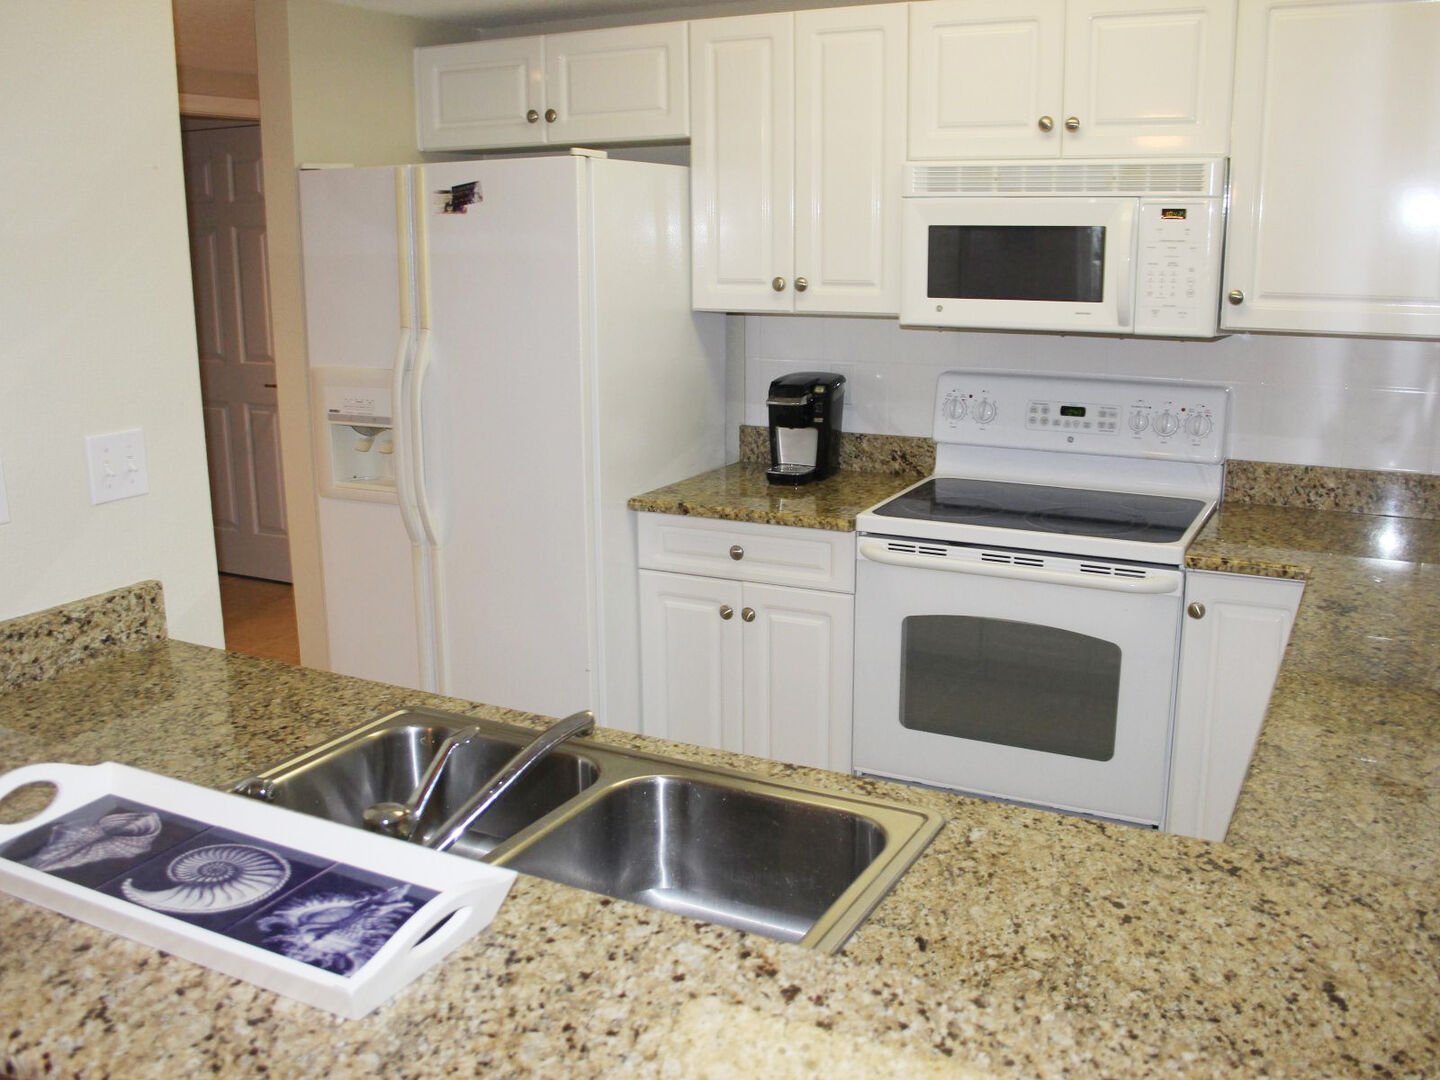 Fully equipped kitchen with granite counter tops.